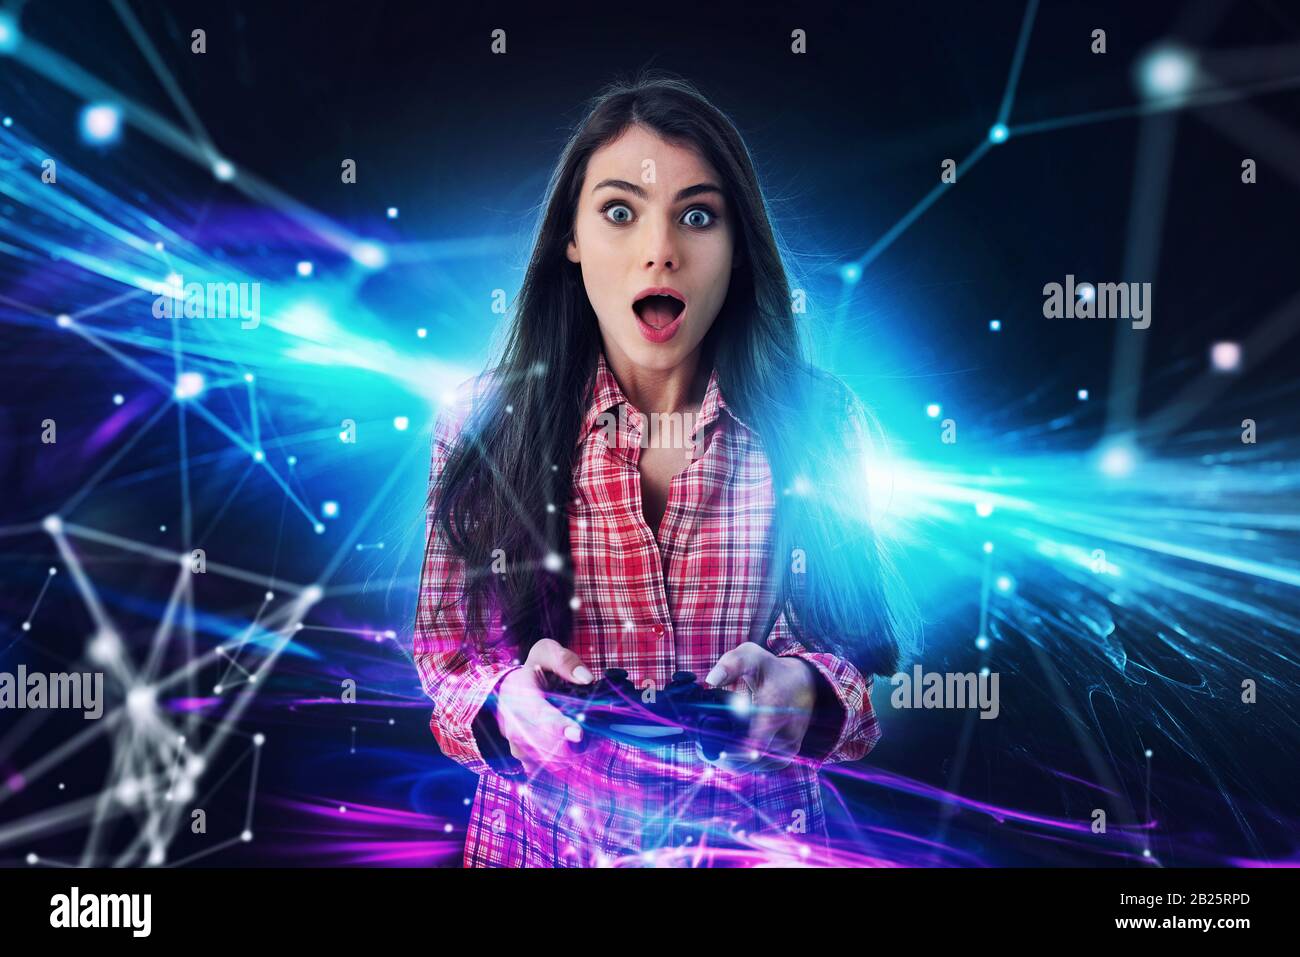 Shocked girl plays with online videogames. Concept of technology and entertainment Stock Photo